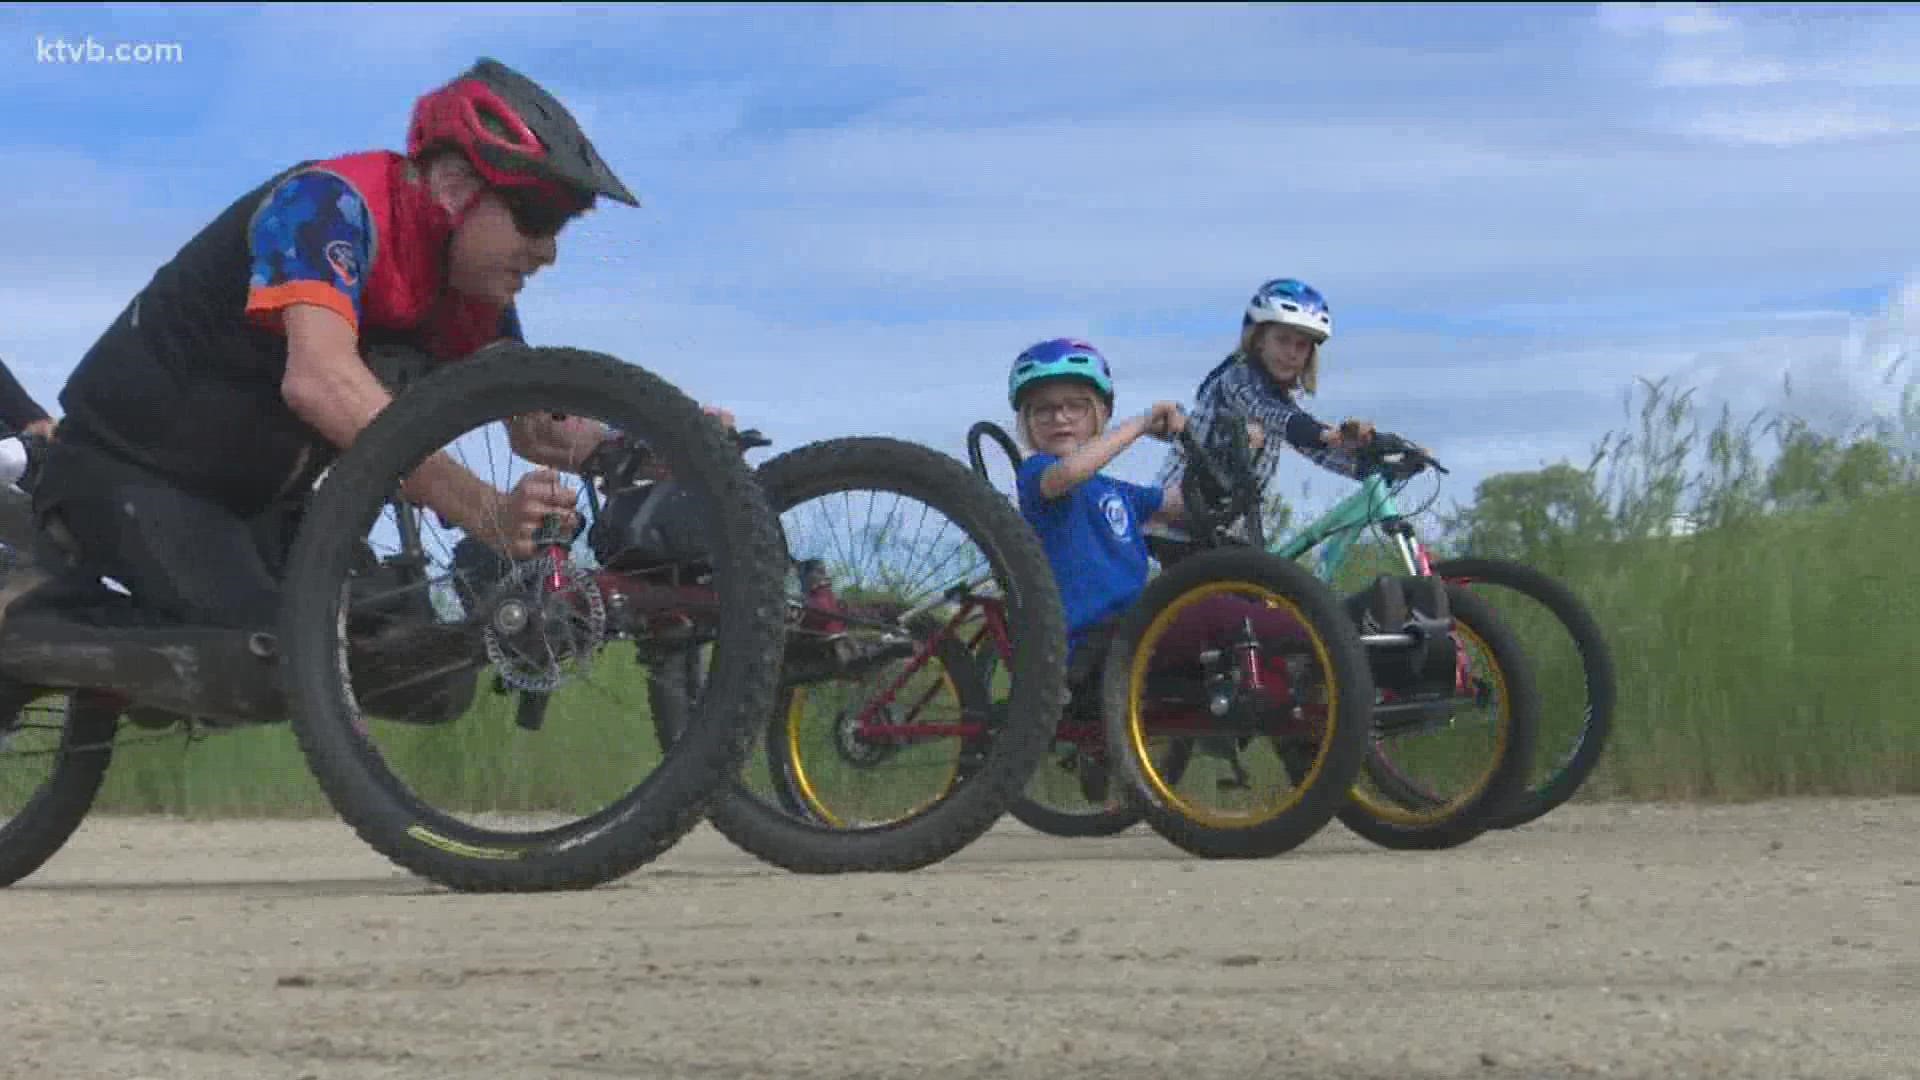 Dozens of athletes with physical challenges learned how to ride an off-road bike customized to their ability level thanks to the Challenged Athletes Foundation.